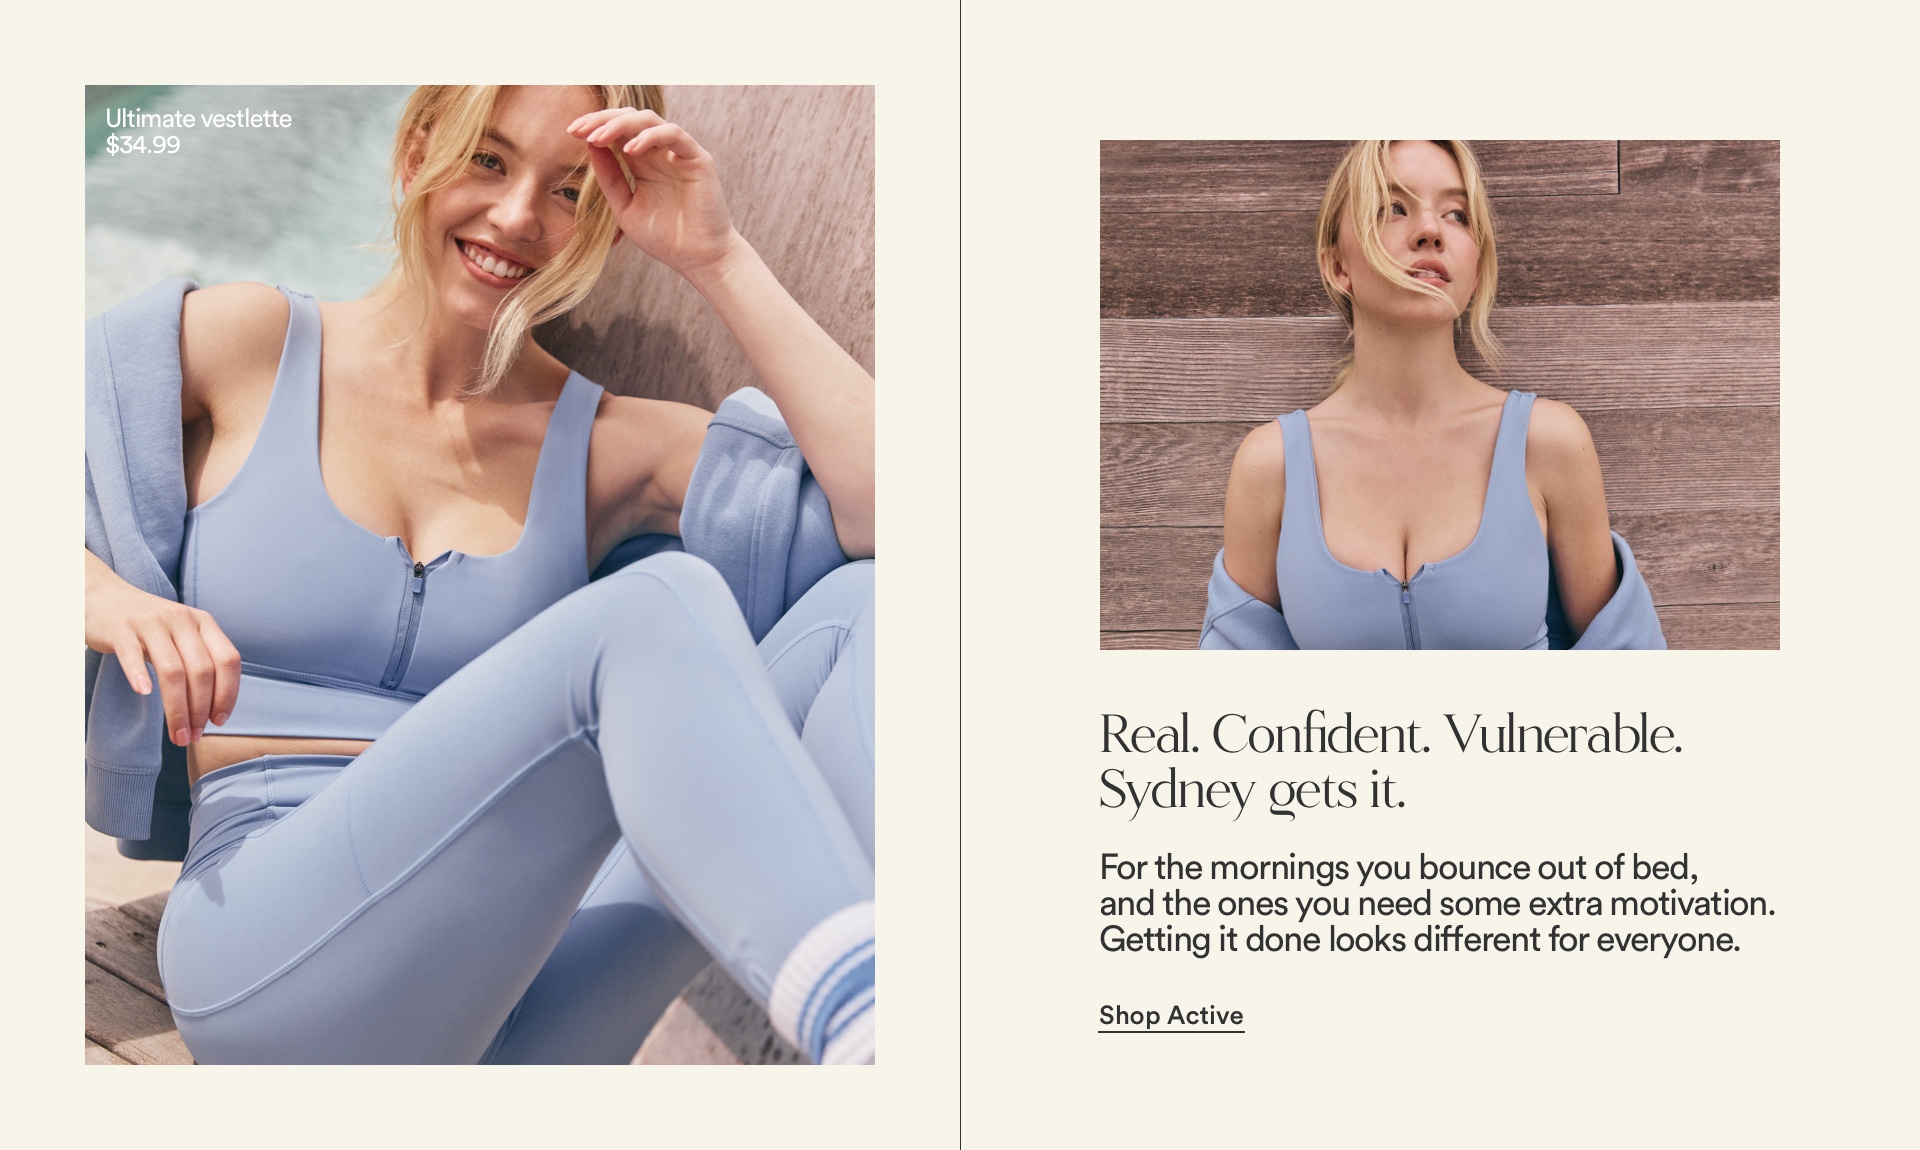 Real. Confident, Vulnerable. Sydney Sweeney Get's It. For the mornings you bounce out of bed, and the ones you need some extra motivation. Getting it done looks different for everyone. Click to Shop Active.